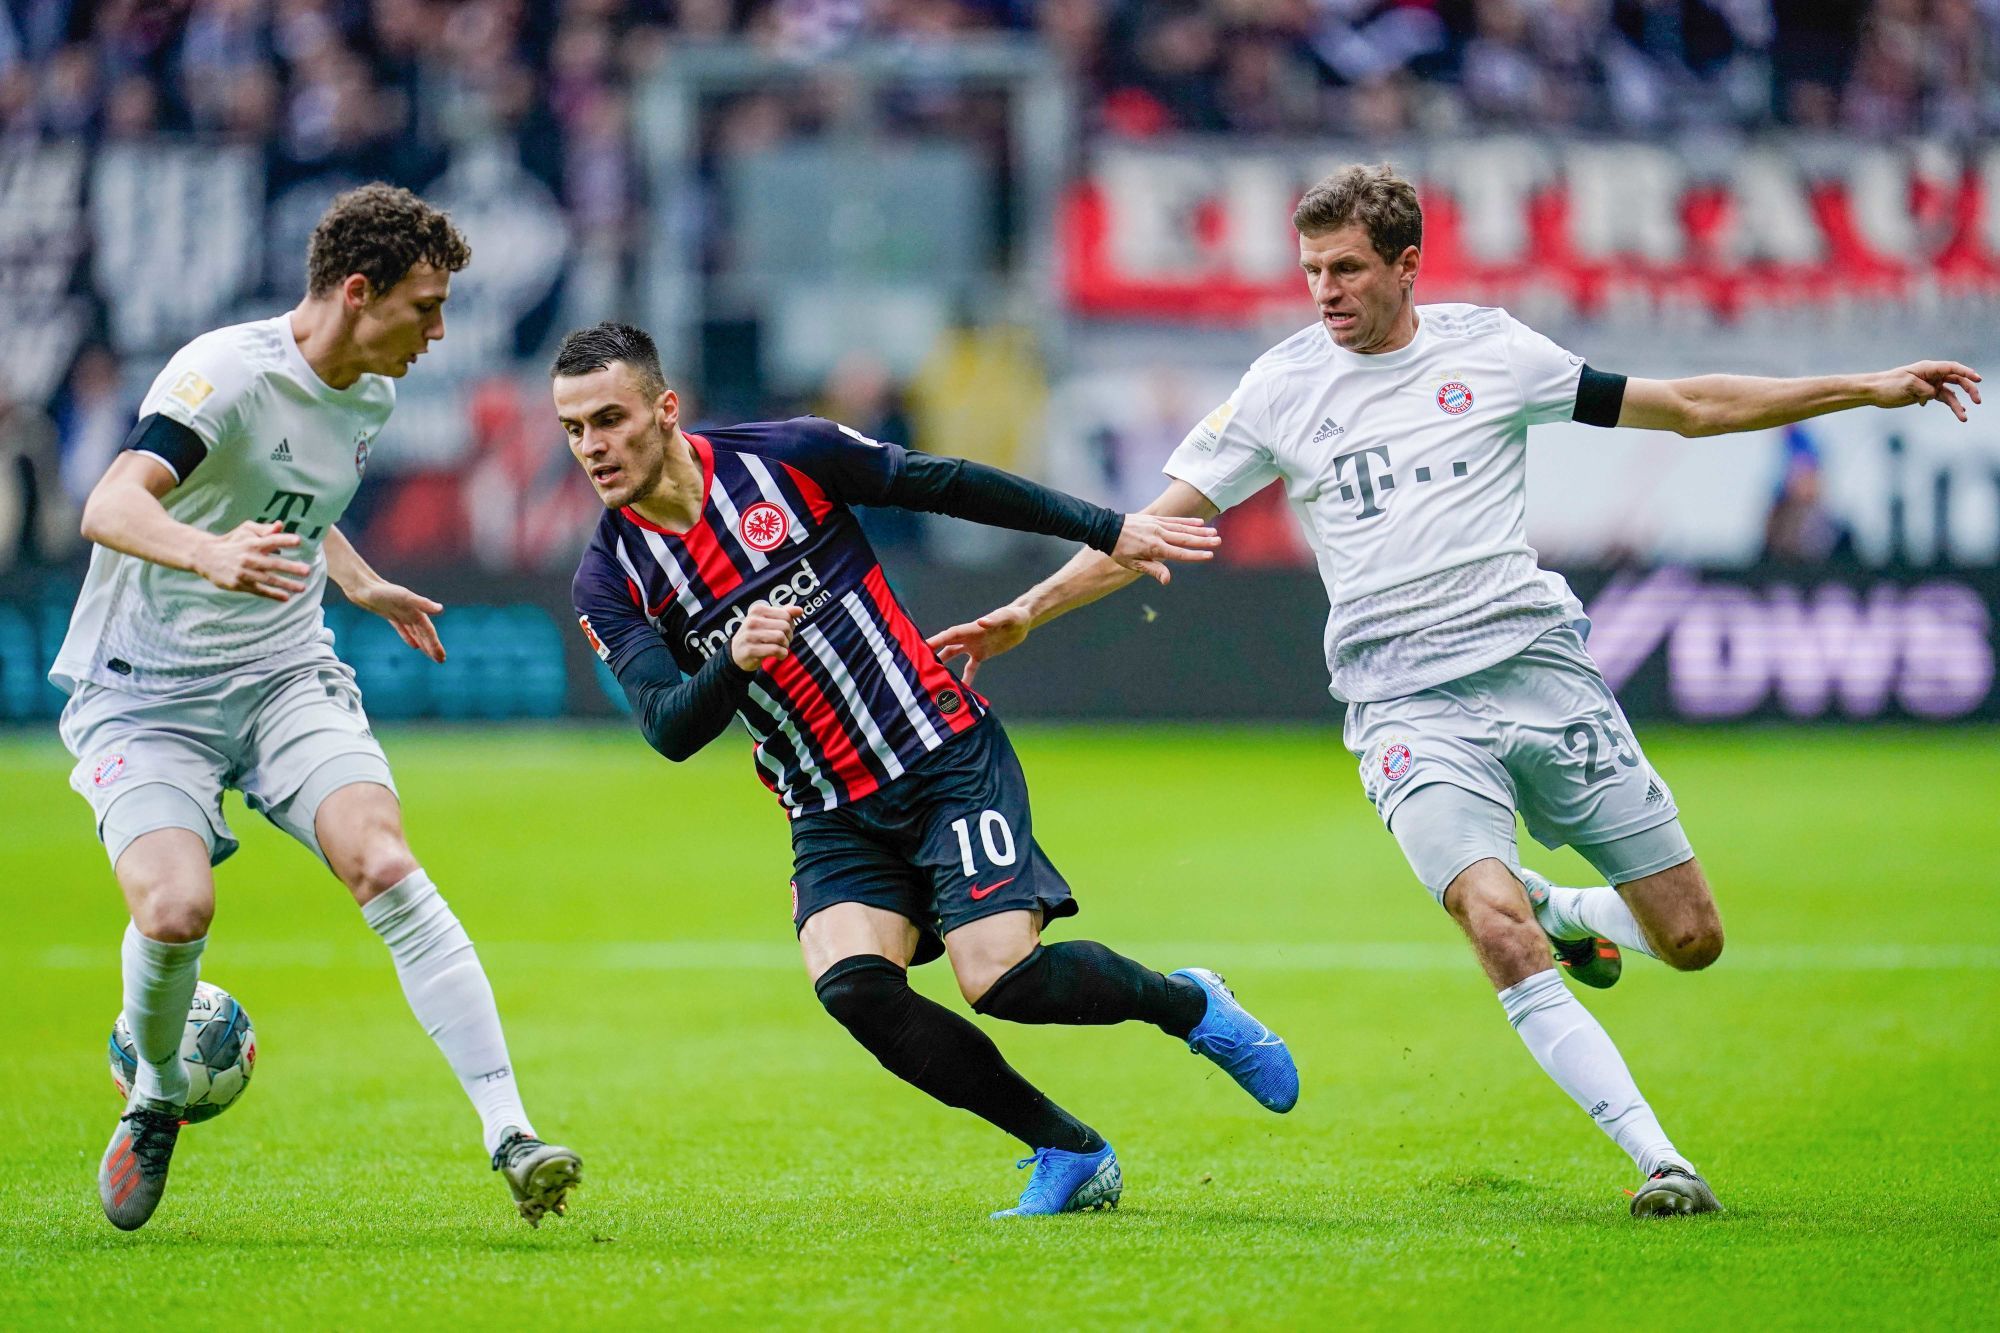 02 November 2019, Hessen, Frankfurt/Main: Soccer: Bundesliga, Eintracht Frankfurt - Bayern Munich, 10th matchday, in the Commerzbank Arena. Munich's Benjamin Pavard (l-r), Frankfurt's Filip Kostic and Munich's Thomas M¸ller fight for the ball. Photo: Uwe Anspach/dpa - IMPORTANT NOTE: In accordance with the requirements of the DFL Deutsche Fu?ball Liga or the DFB Deutscher Fu?ball-Bund, it is prohibited to use or have used photographs taken in the stadium and/or the match in the form of sequence images and/or video-like photo sequences. 

Photo by Icon Sport - Commerzbank-Arena - Francfort (Allemagne)